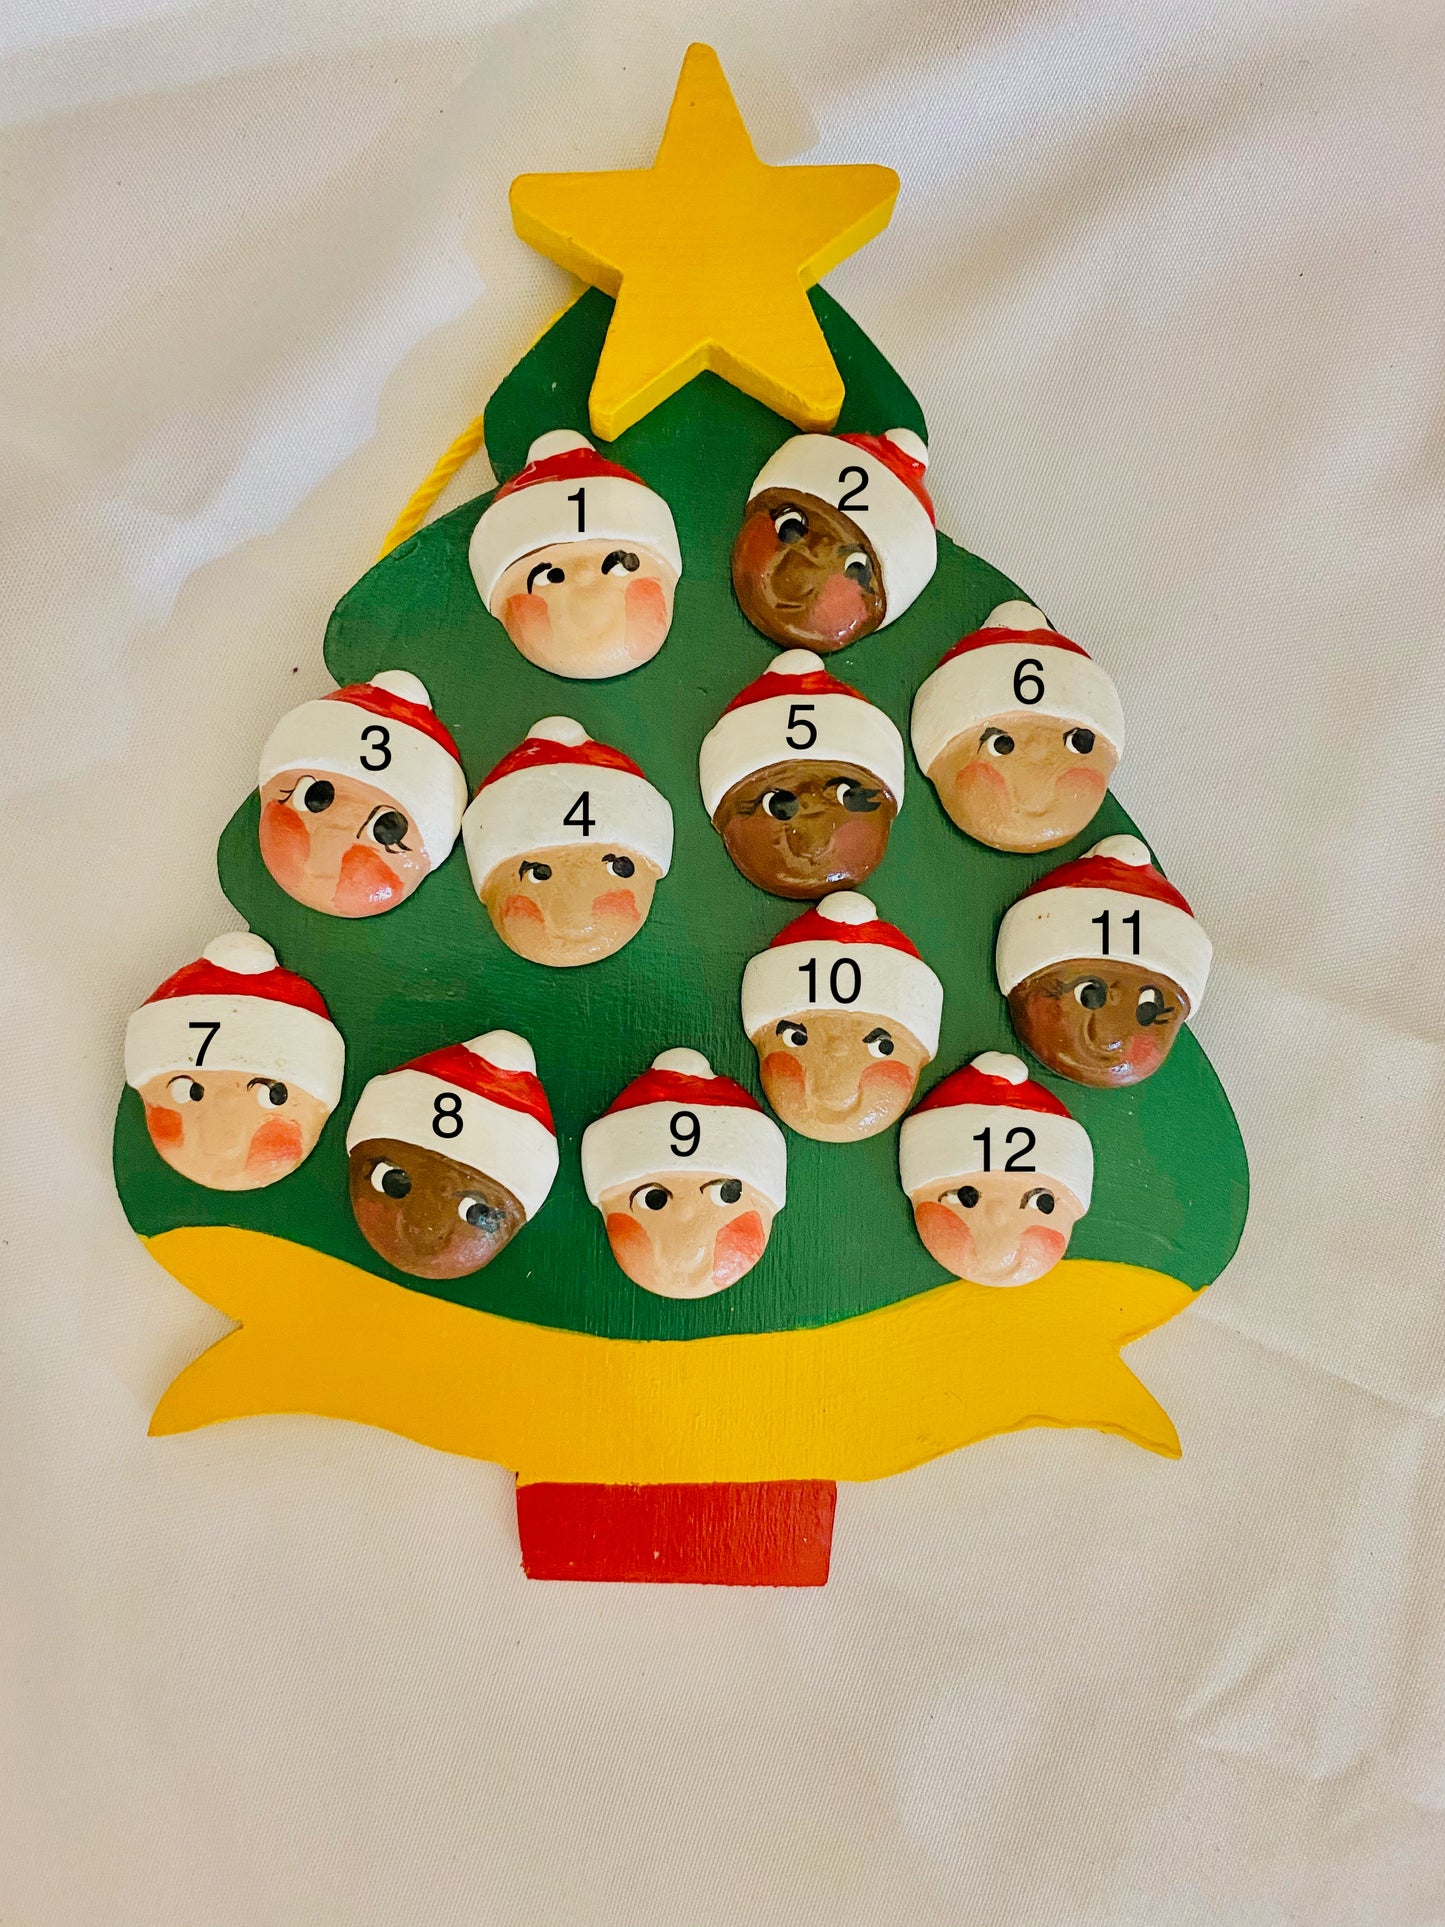 Personalized Ornament  12 Santa Faces on a Christmas Tree  6" X 4.5"